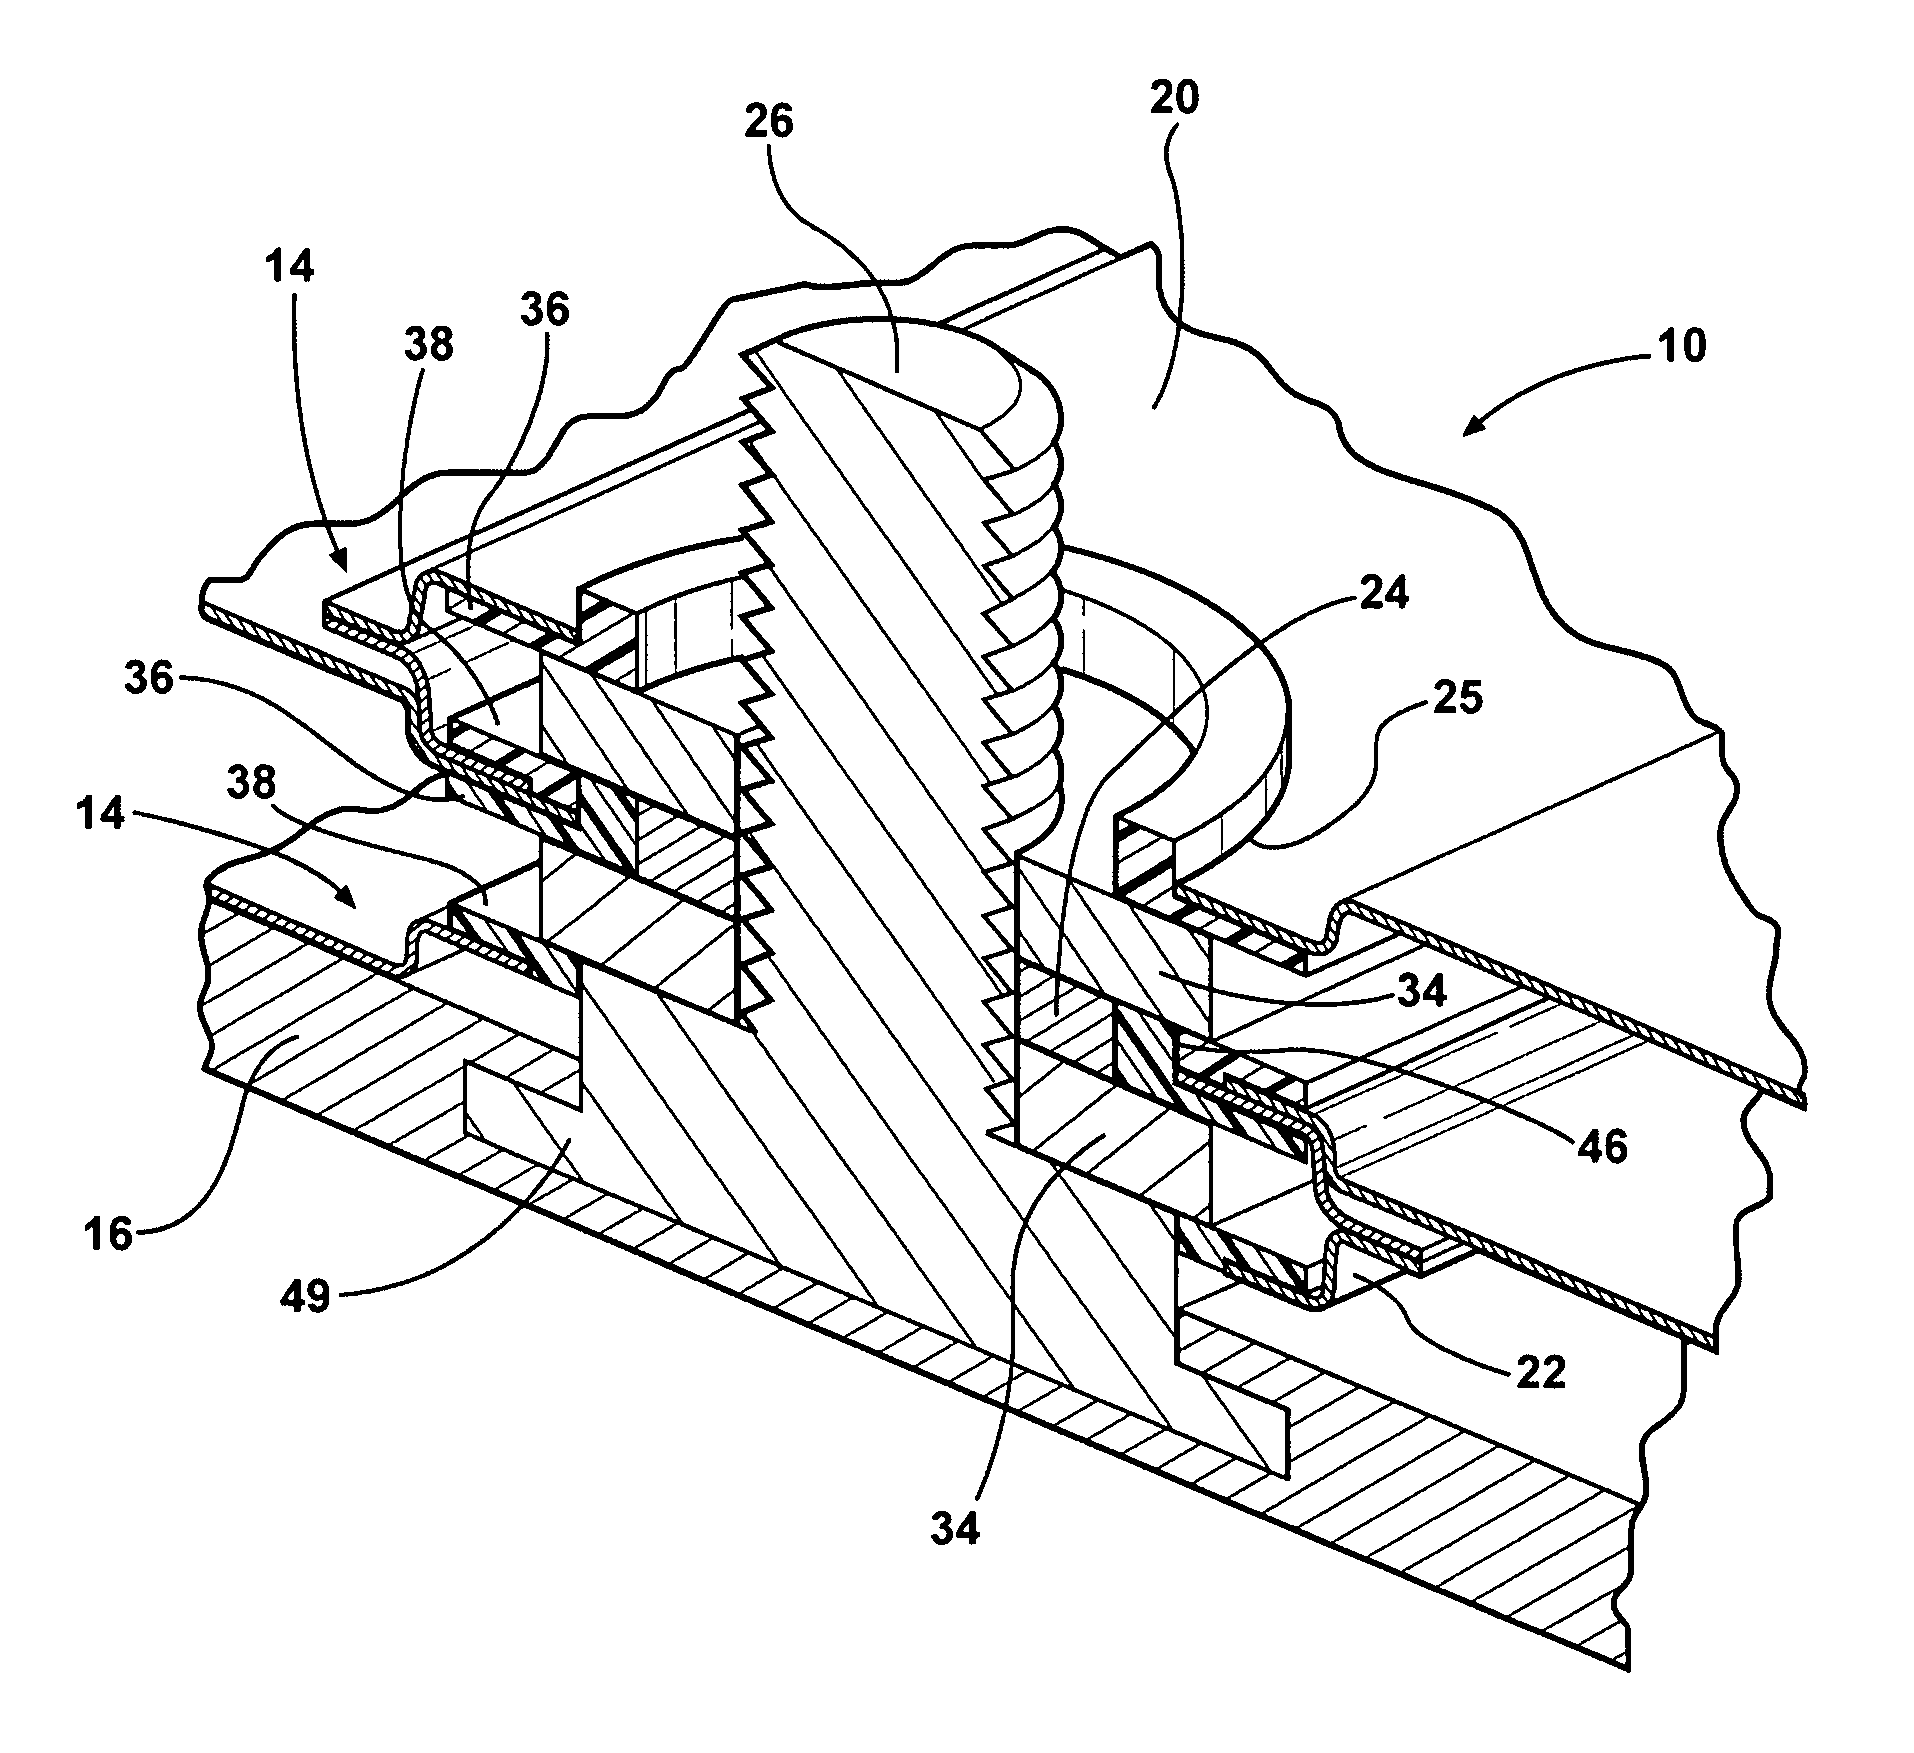 Battery assembly and method of forming the same